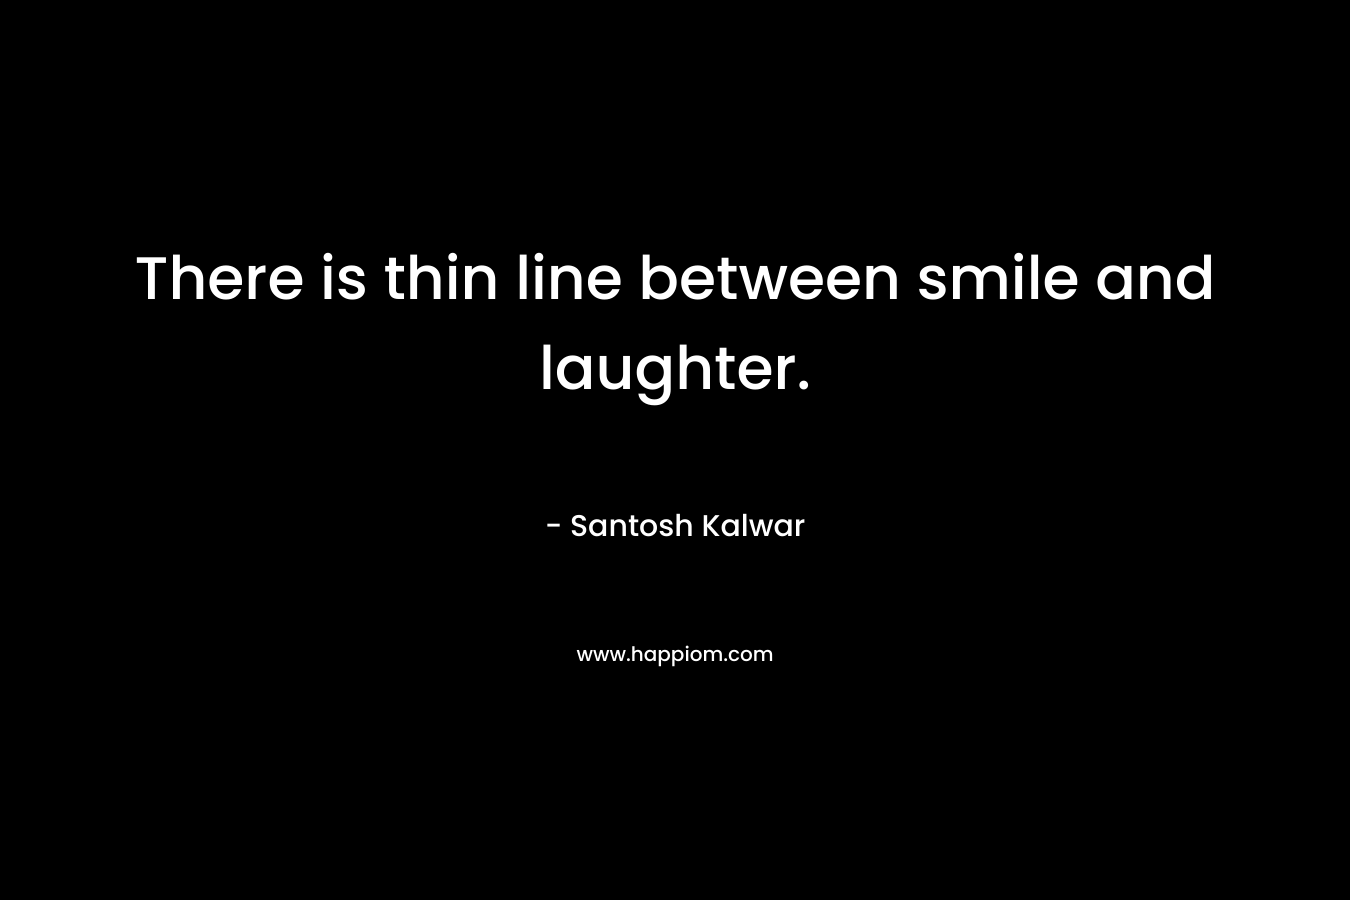 There is thin line between smile and laughter.